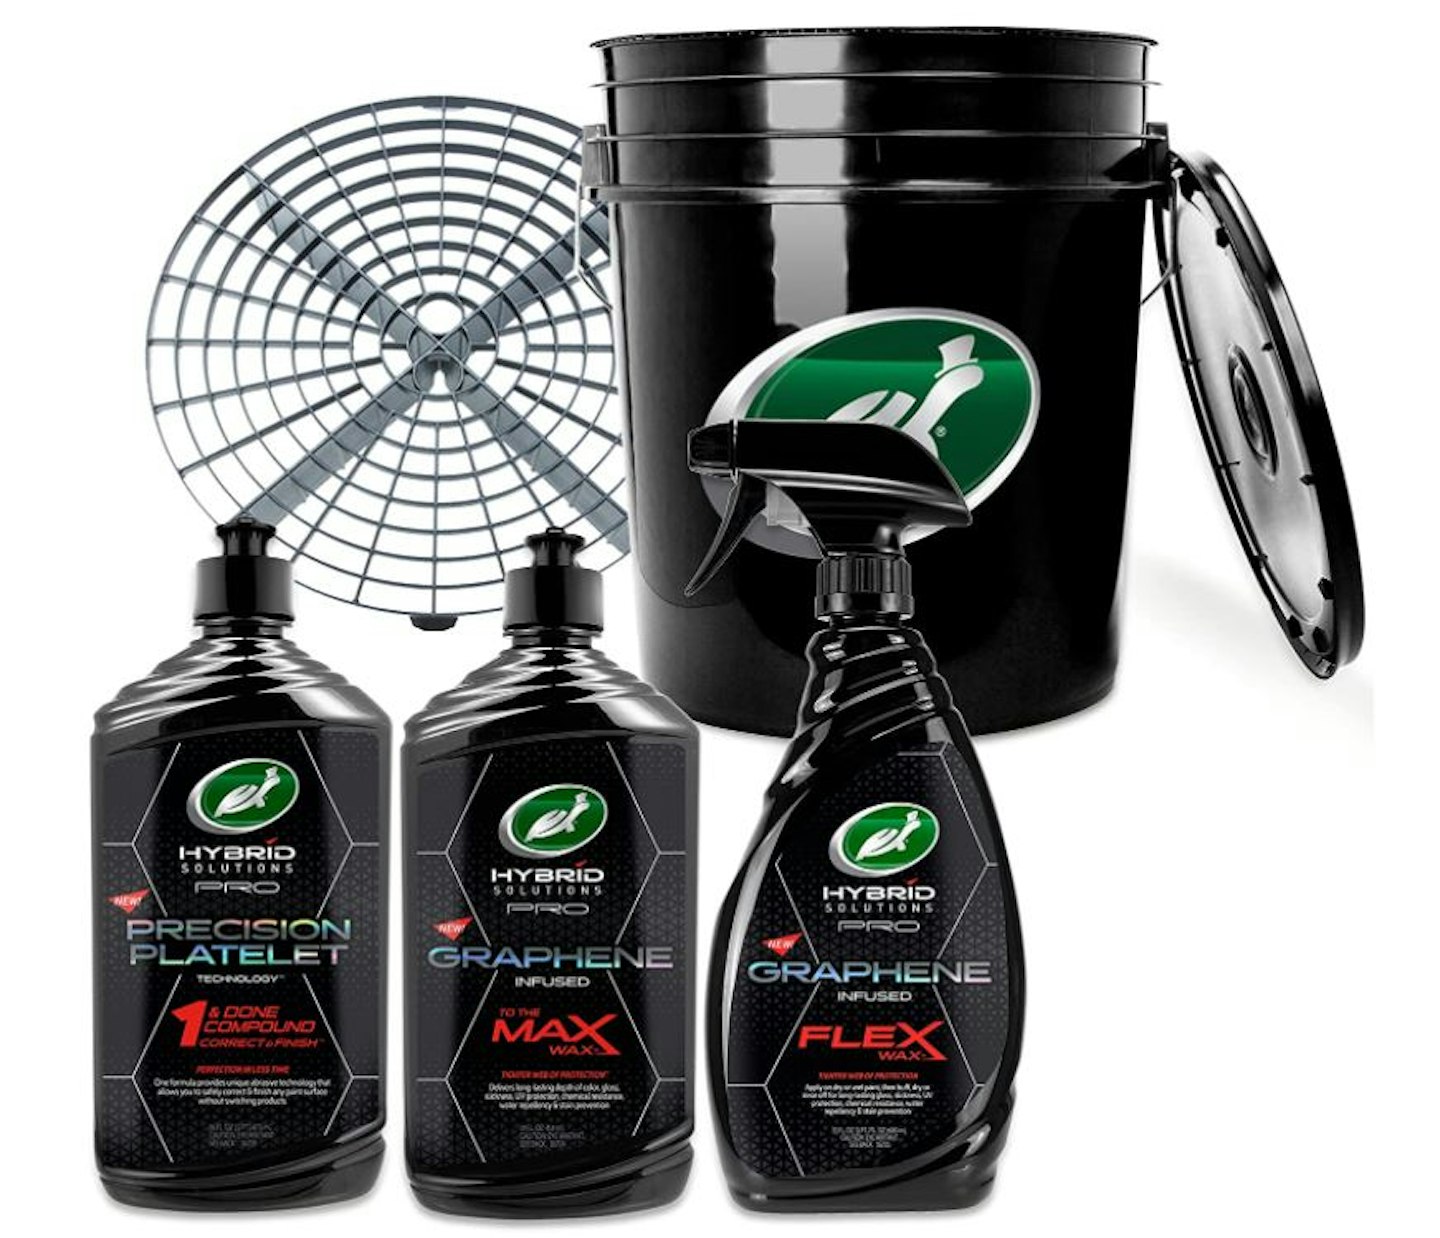 Turtle Wax Hybrid Solutions Pro Triple Pack (Bucket & Grit Guard Included)